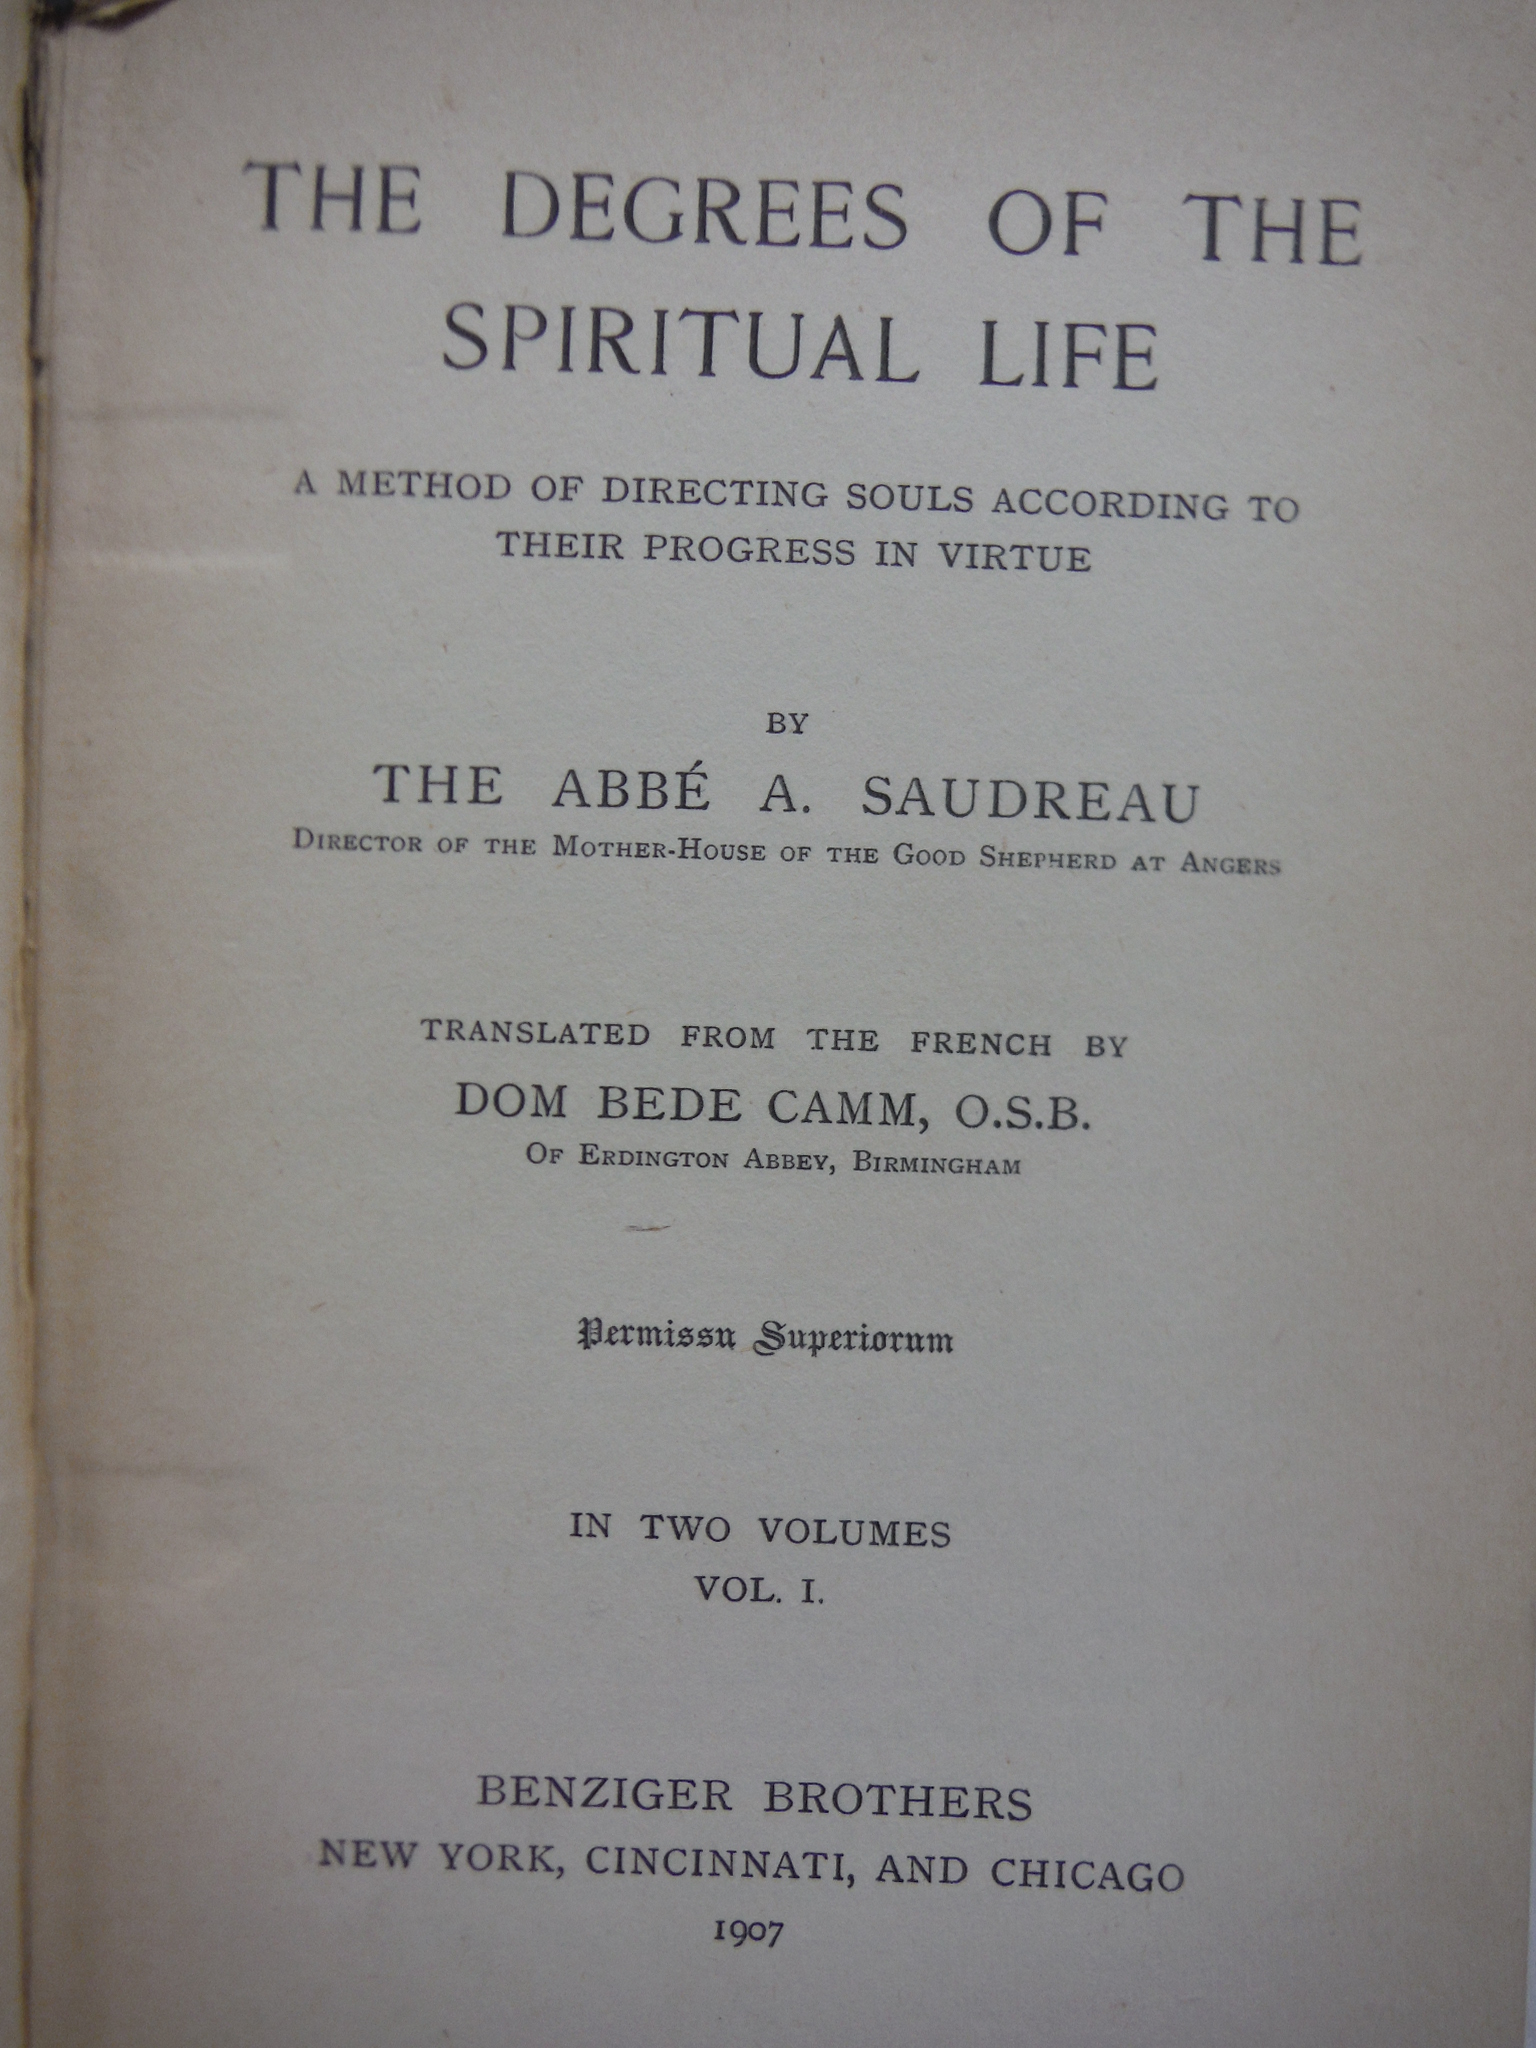 Image 4 of The Degrees of the Spiritual Life A Method of Directing Souls According to their